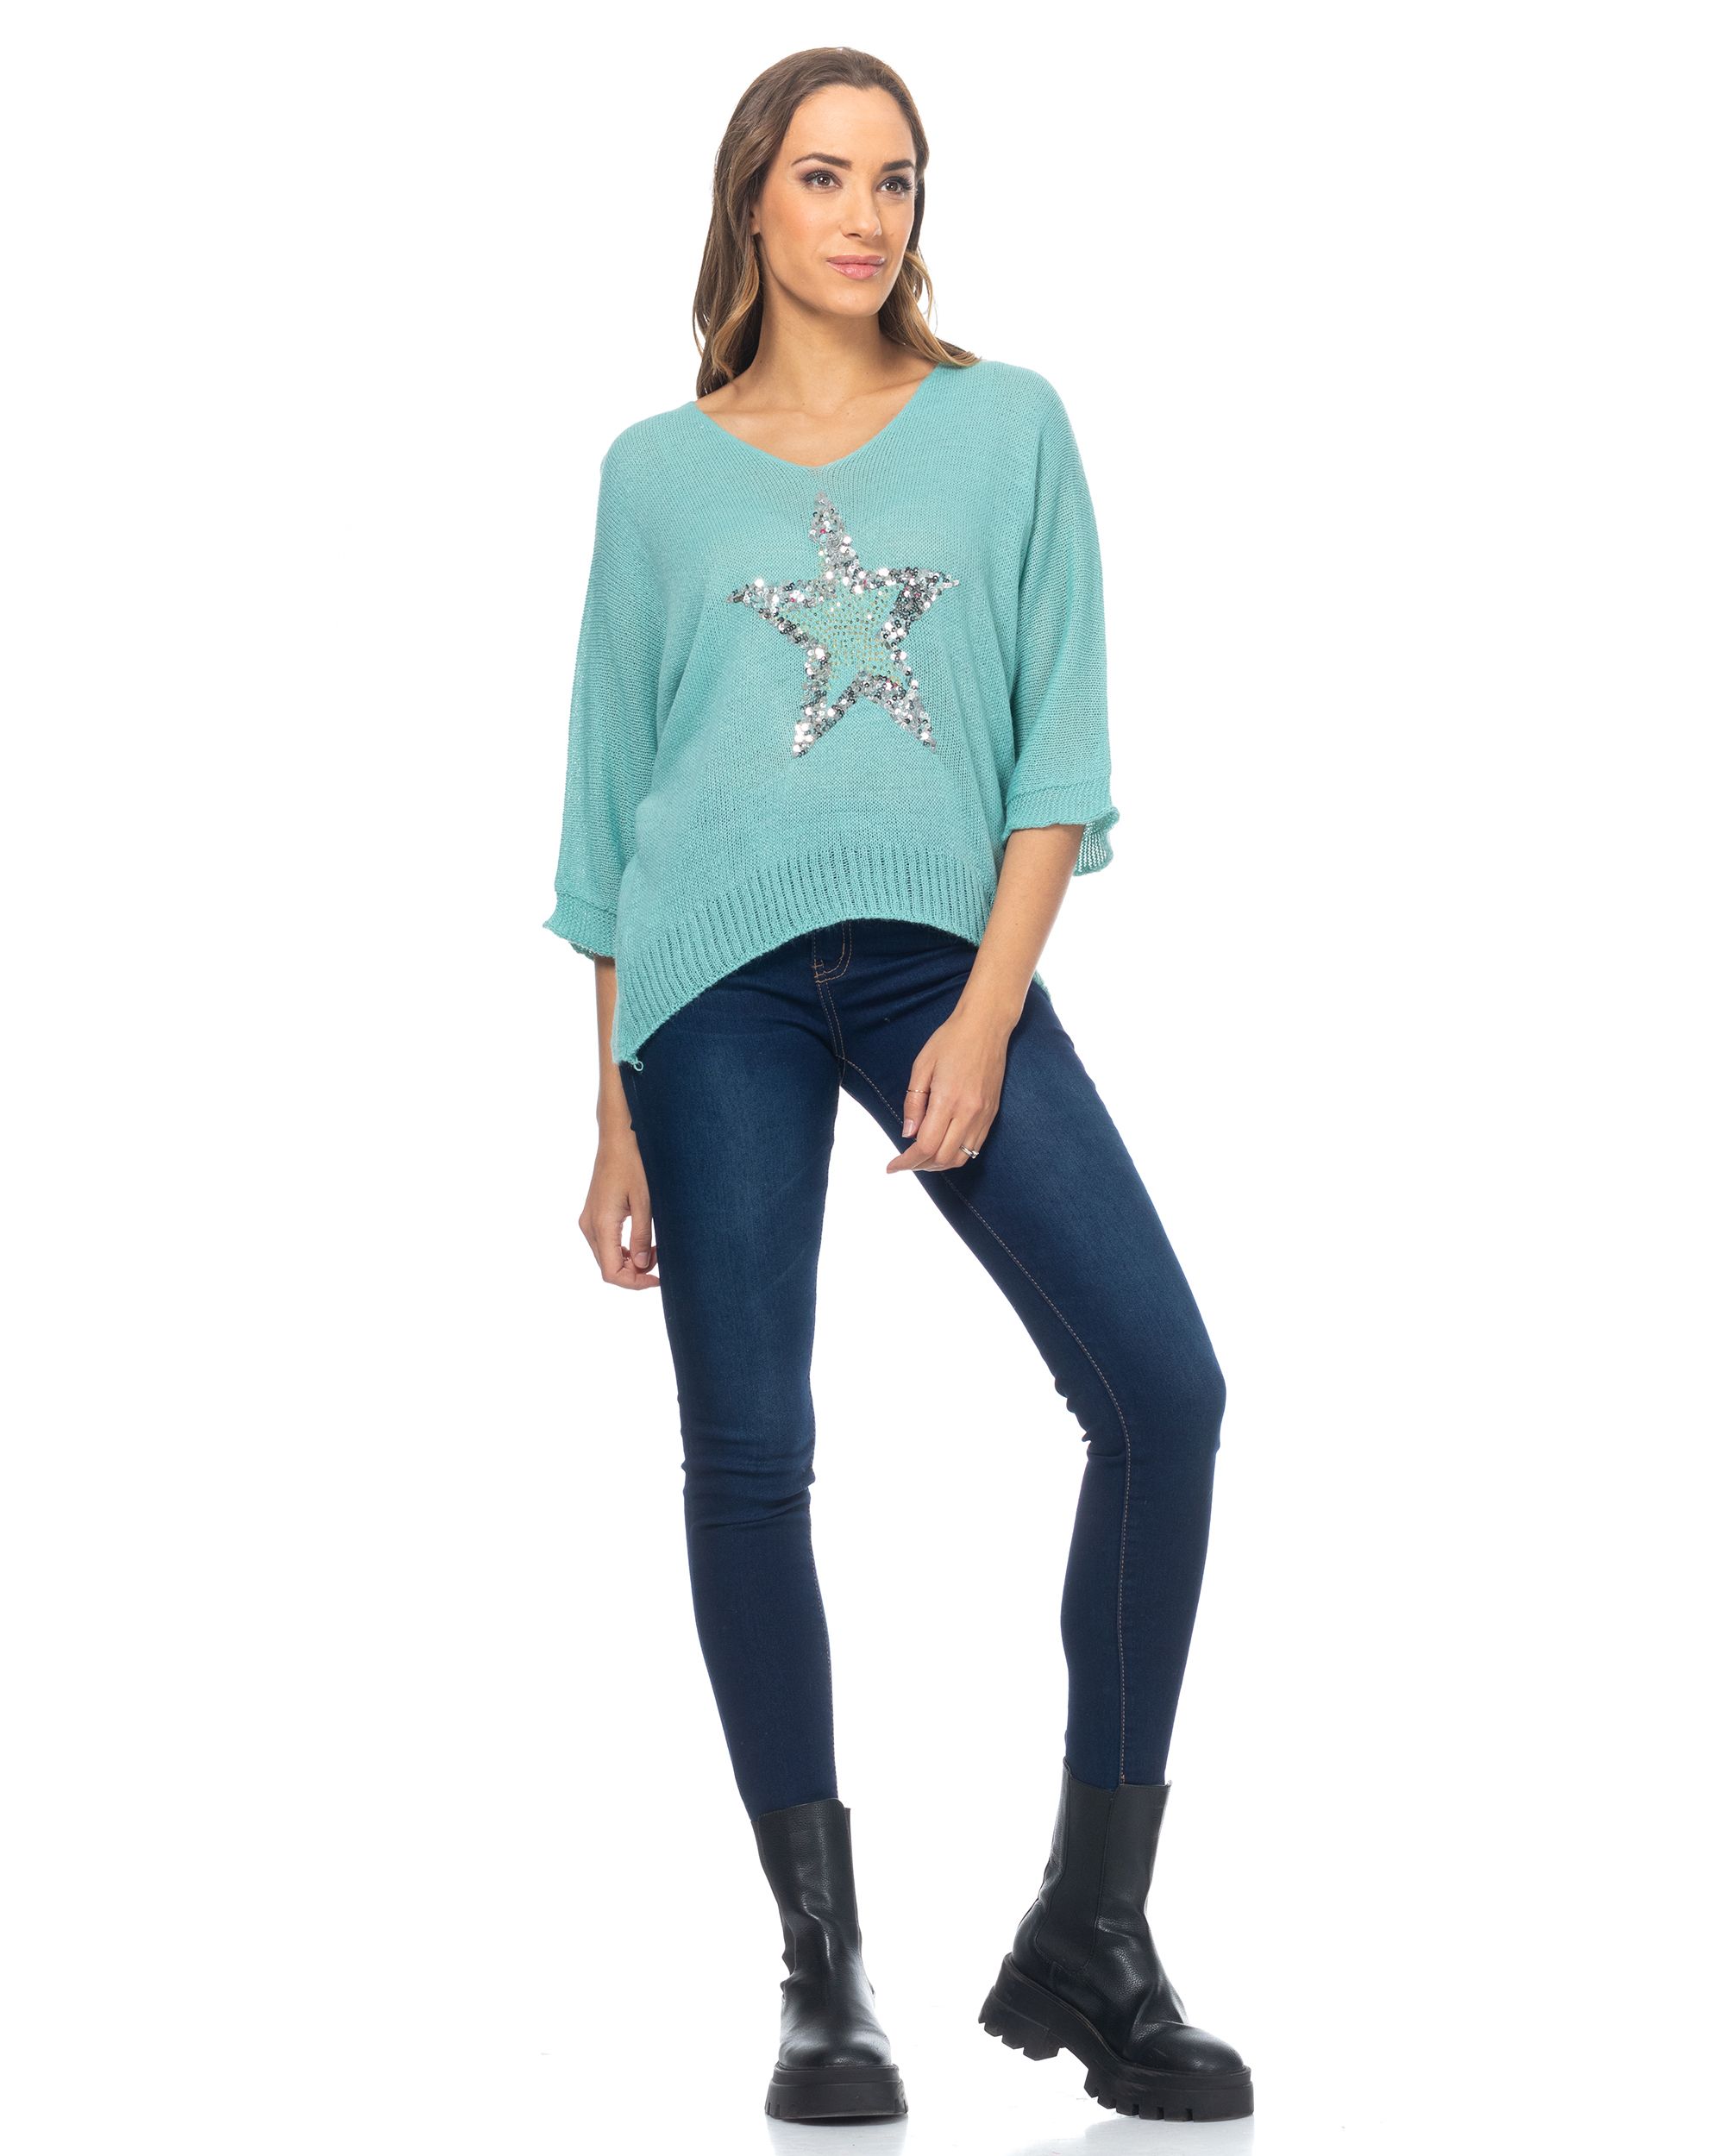 Knit sweater  with rhinestone star and french sleeves